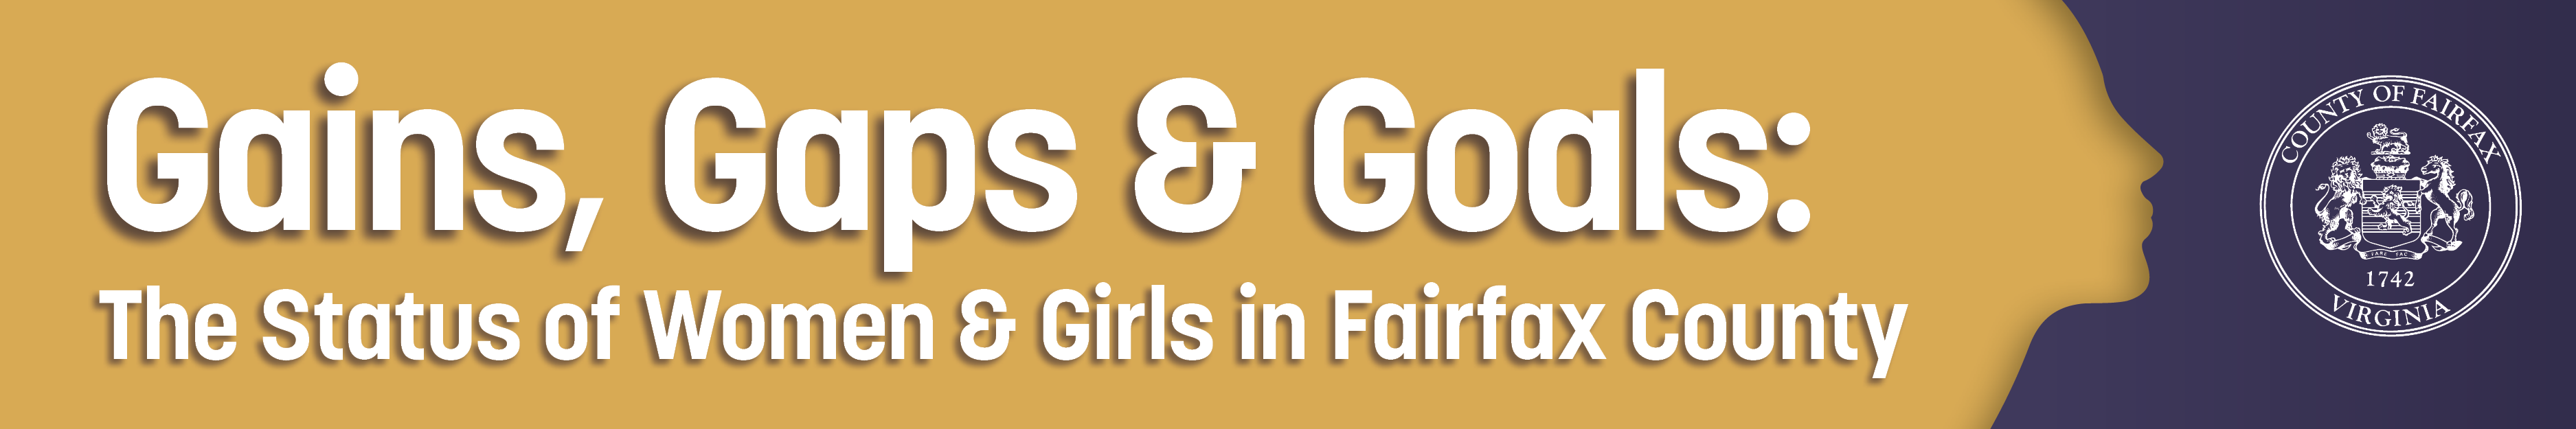 Gains, Gaps & Gaps: The Status of Women and Girls in Fairfax County